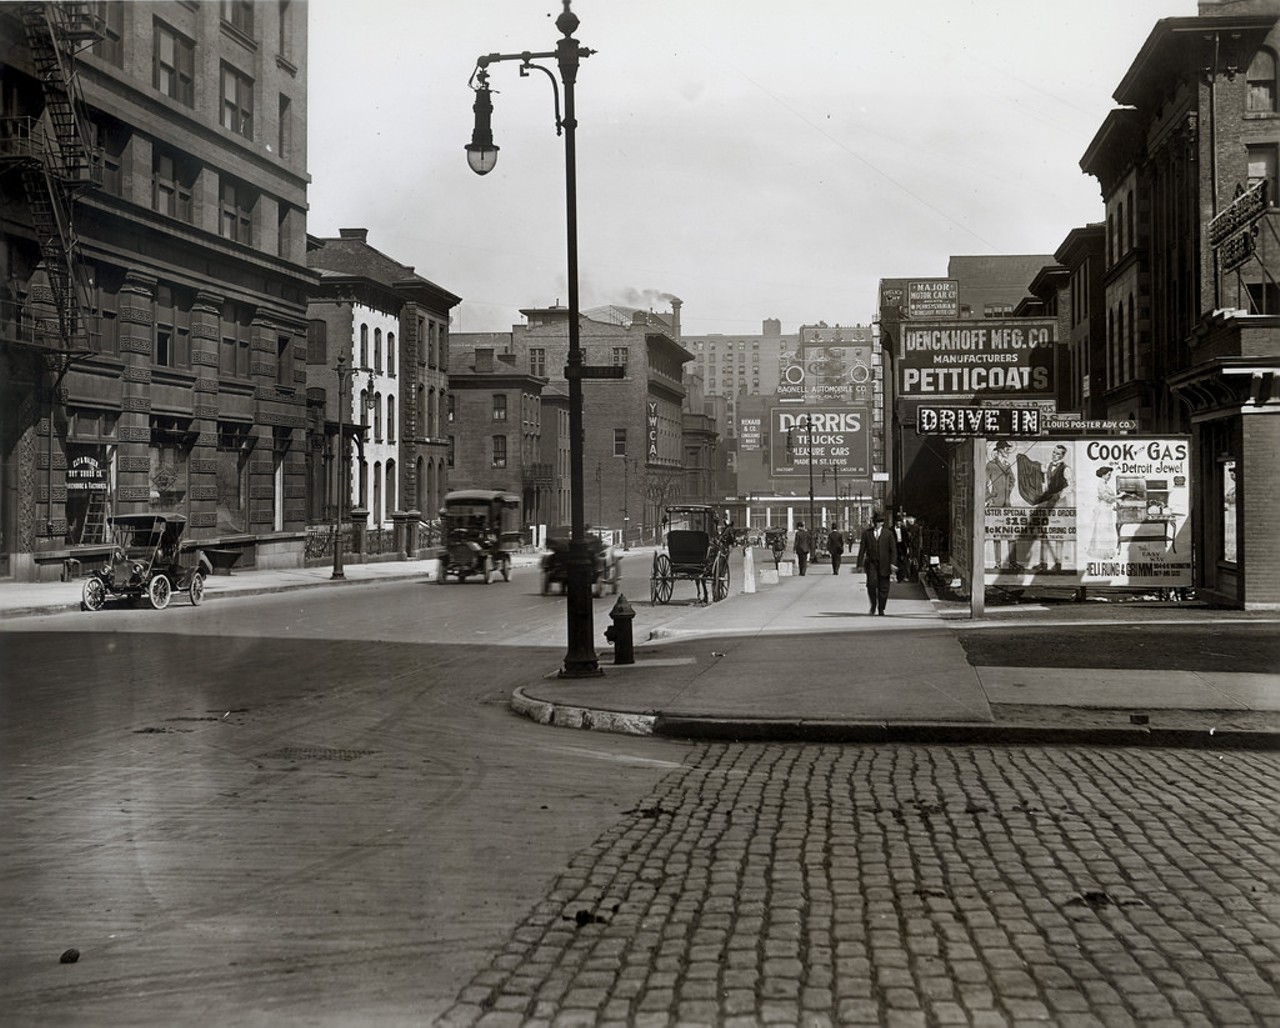 Looking east on Locust Street (Lucas Place) from Sixteenth Street, 1914. Note the seam in the foreground where macadam pavement meets granite block.